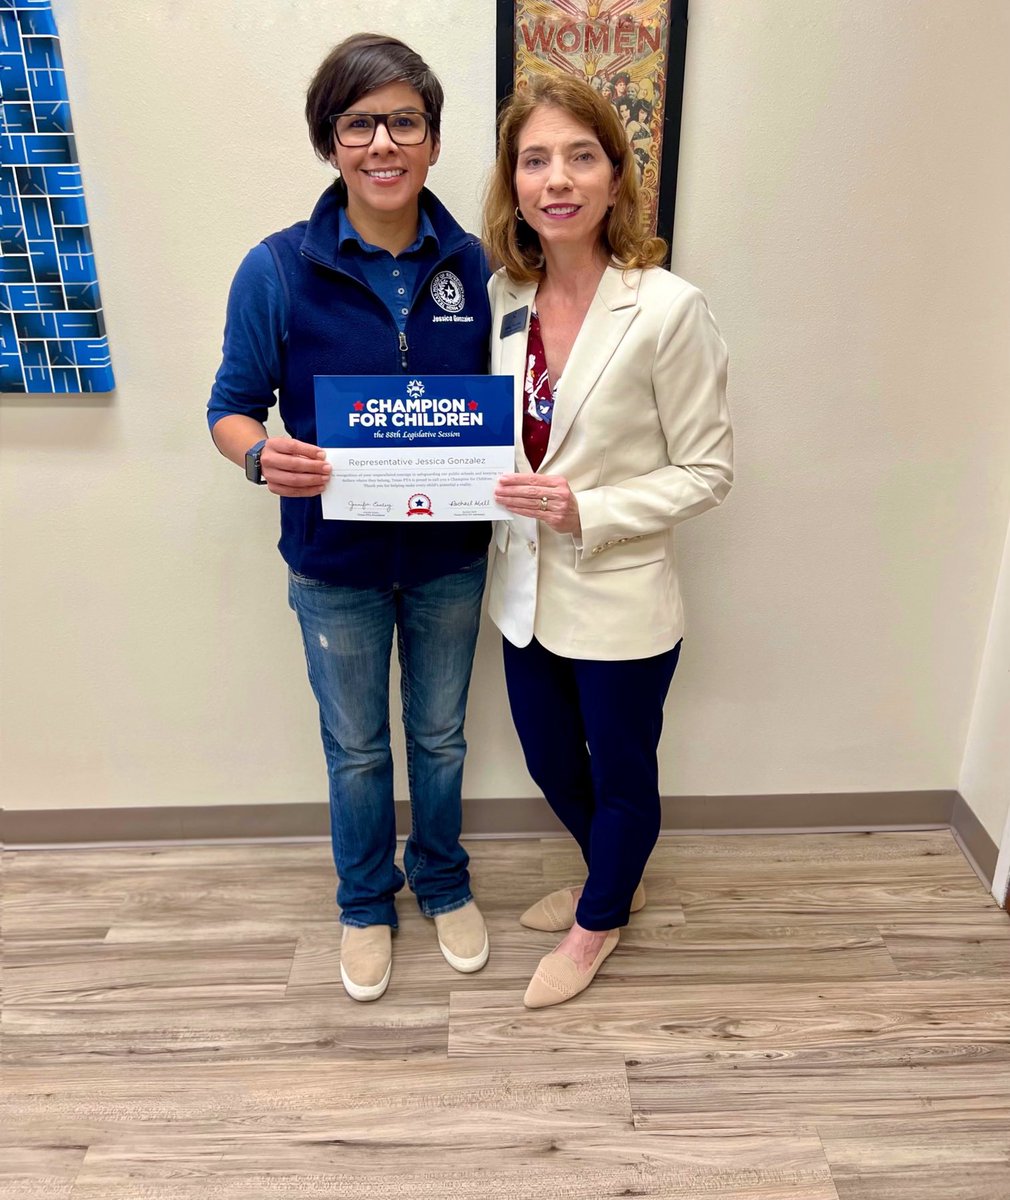 Today, I had the privilege to meet with Kelley Thomas, Vice President of Leadership with Texas PTA. She presented me with the Champion for Children award for my work to protect public schools during the 88th Legislative Session. I am grateful for this recognition and motivated to